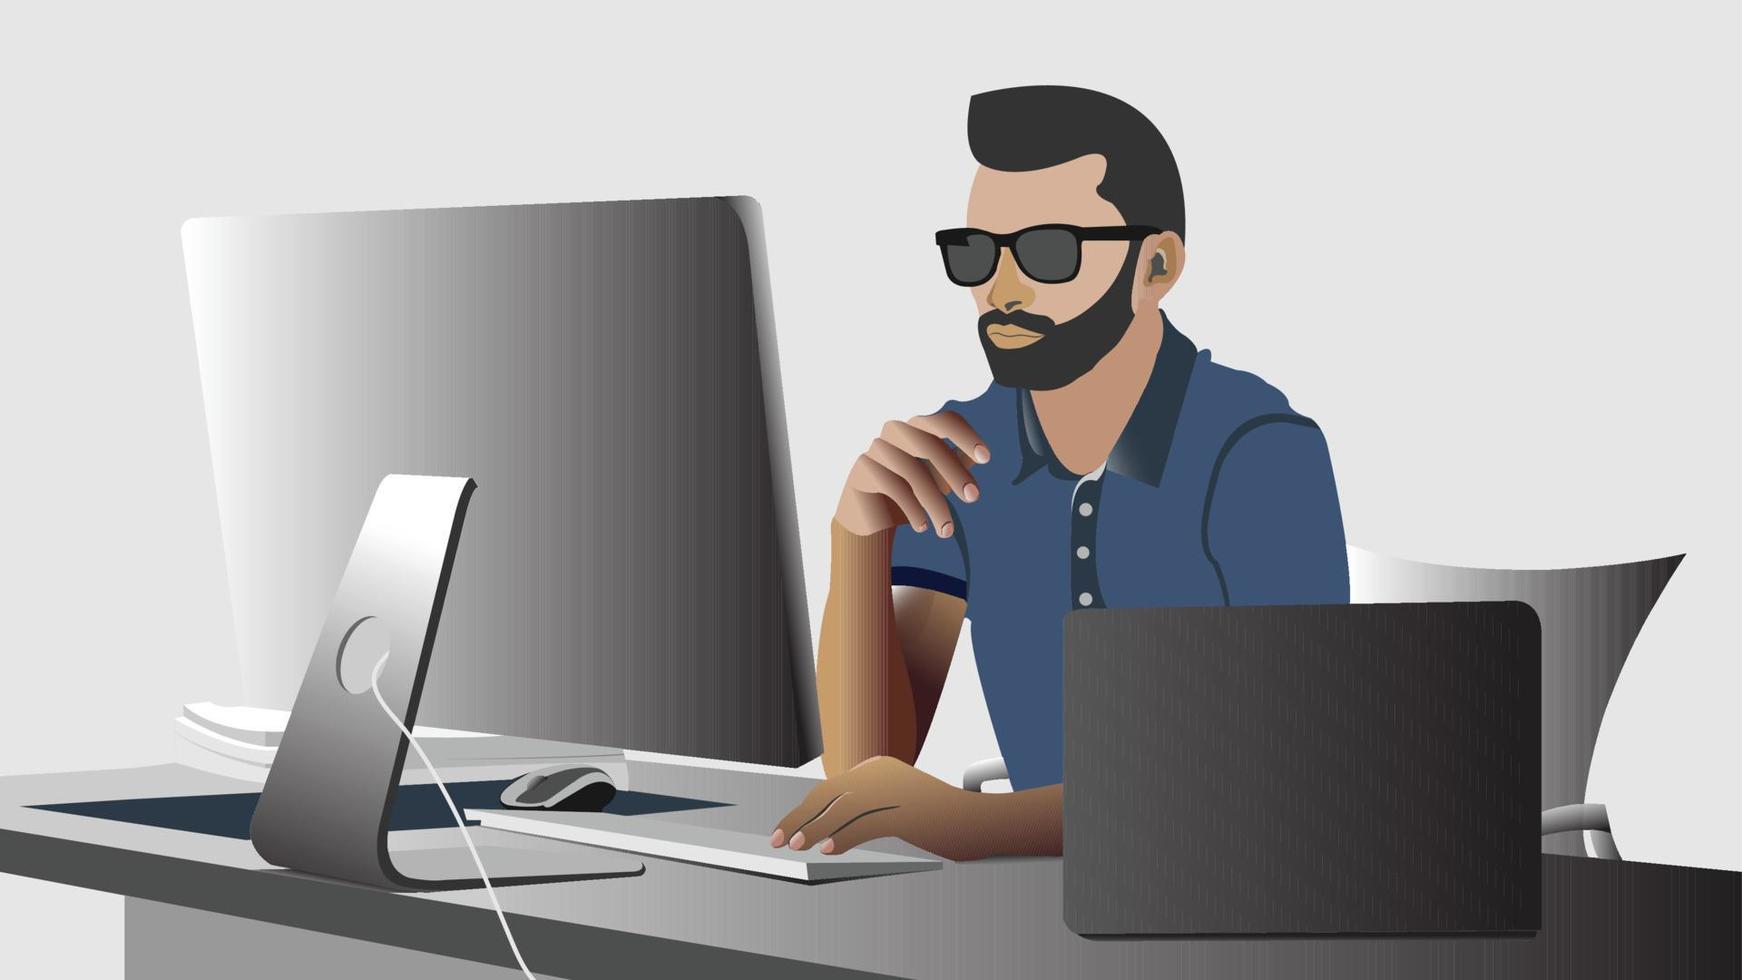 Business Man People Working in Workplace Office Company on Laptop Desktop Computer Flat Vector Illustration, Man Working Remote Job from Home Online